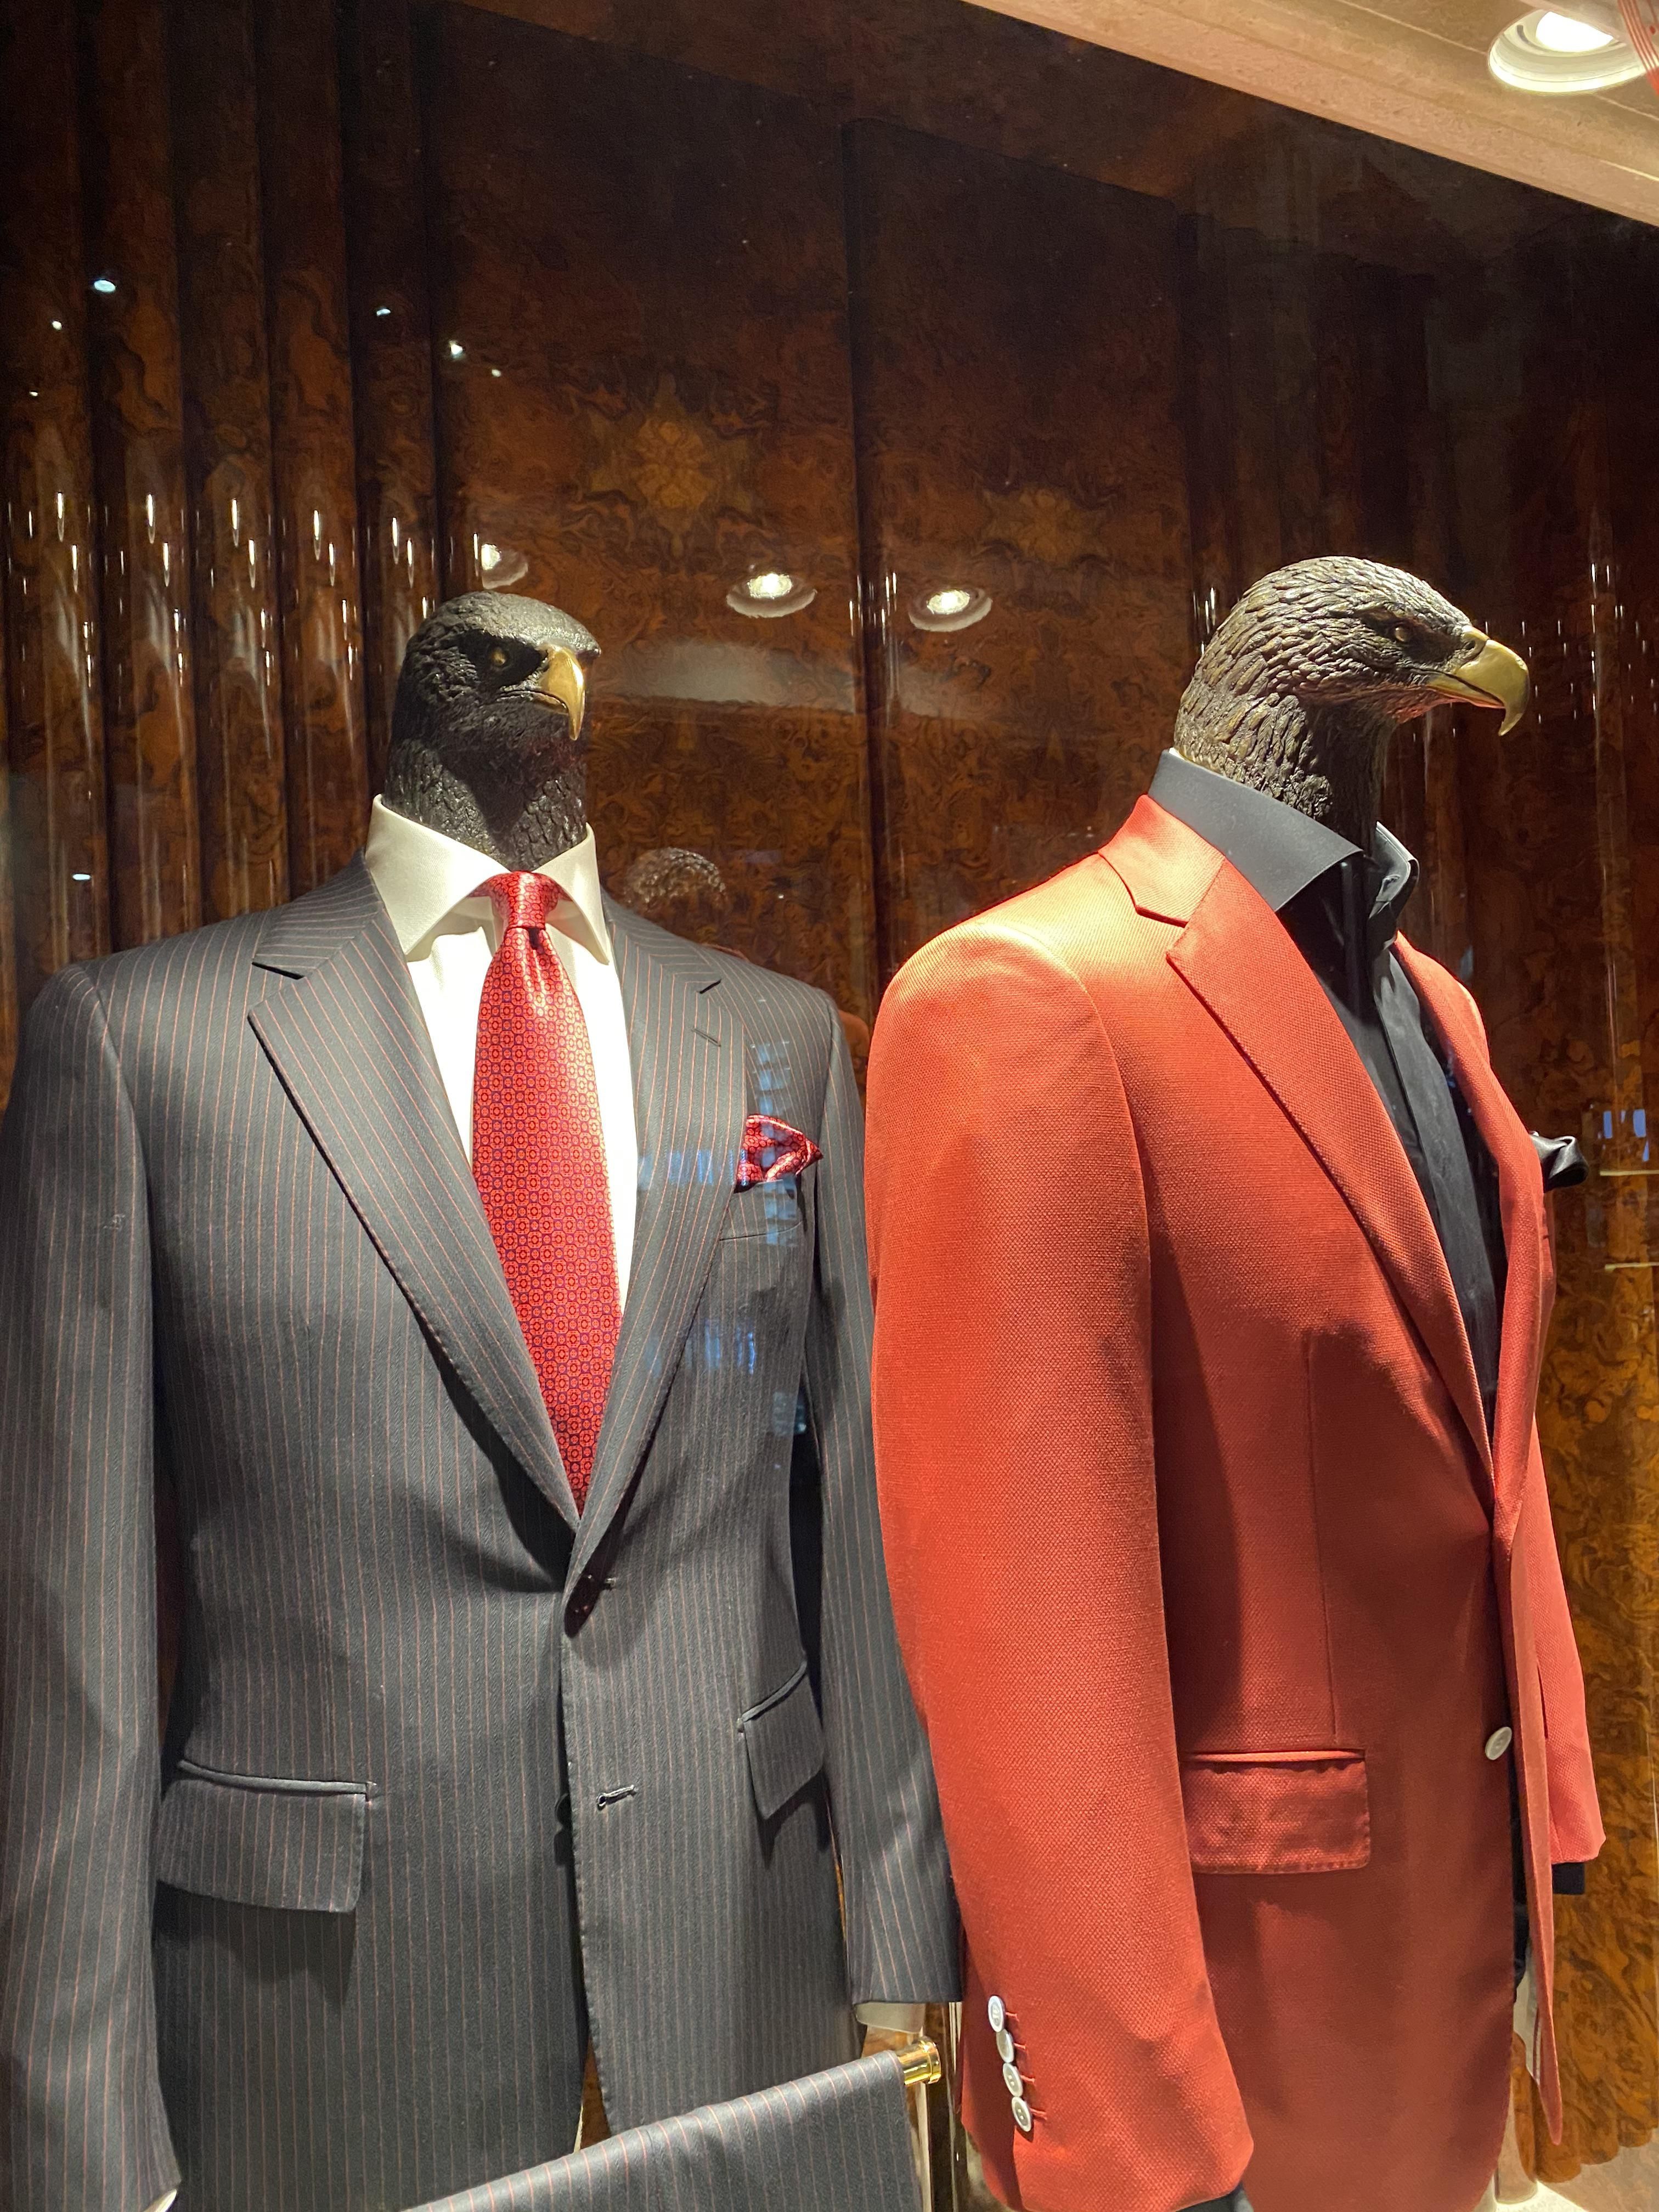 This stores emblem/mascot is an eagle, and so are the mannequins